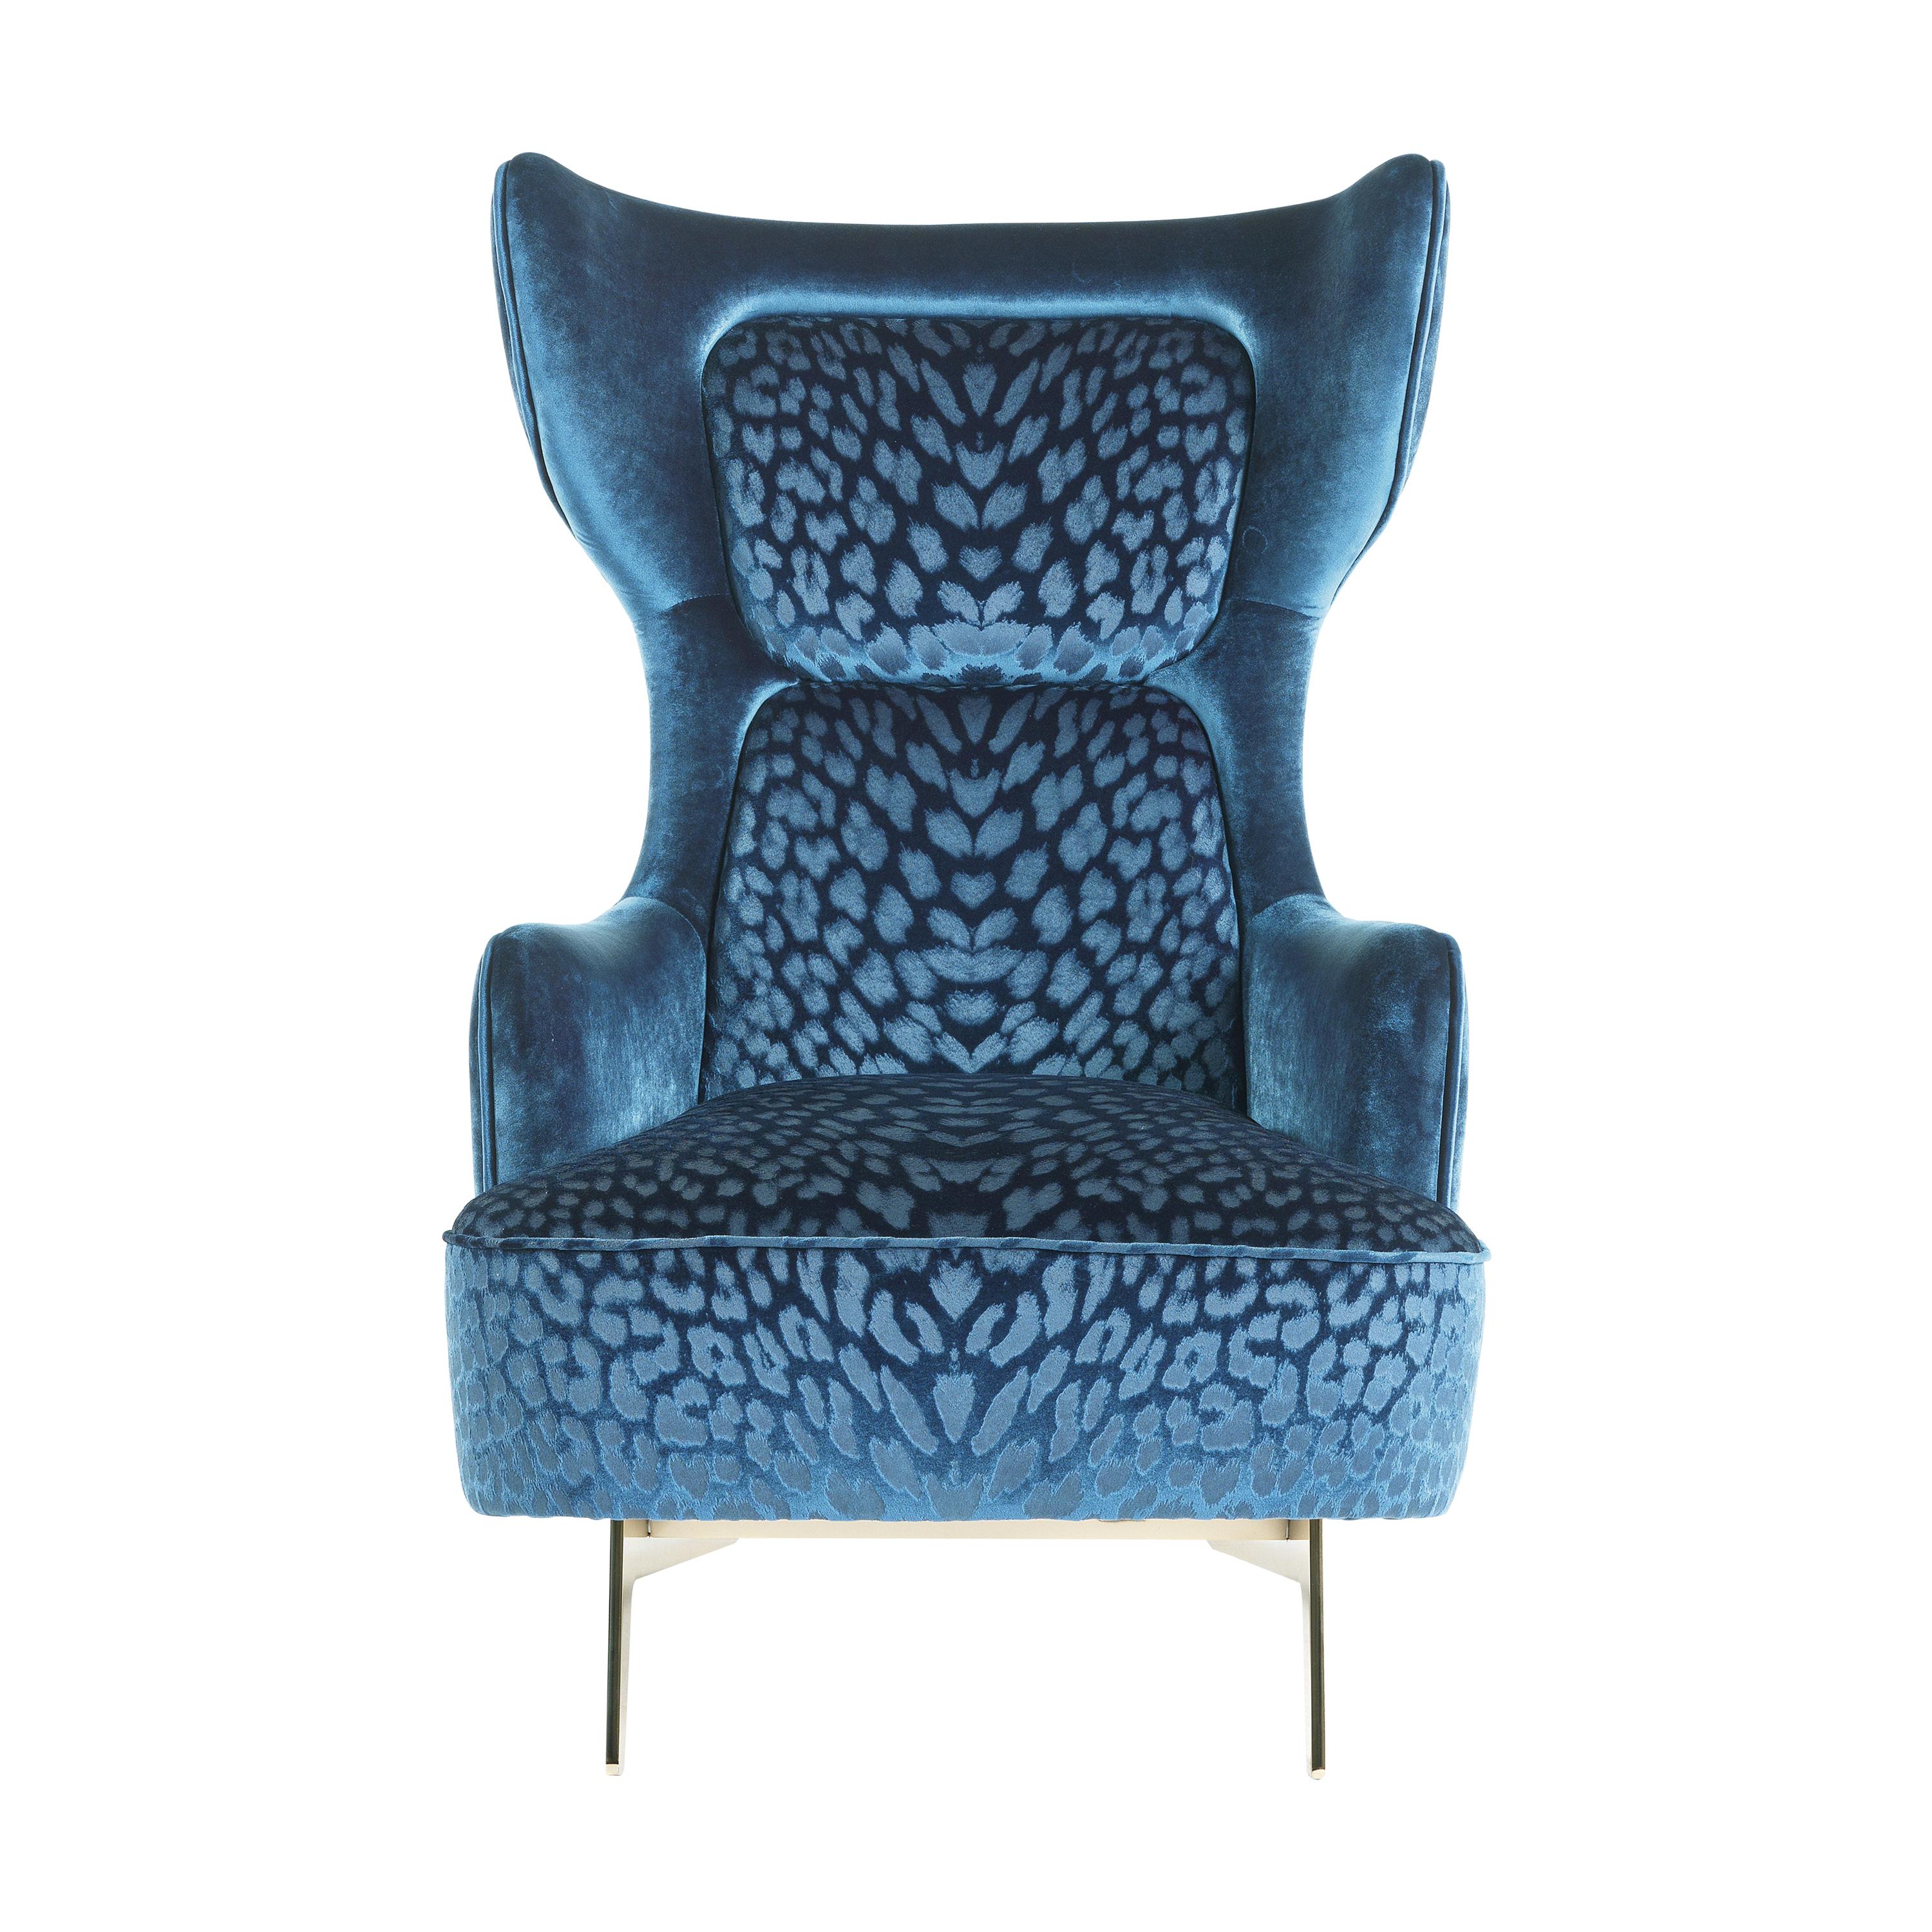 21st Century Guam Armchair in Blue Fabric by Roberto Cavalli Home Interiors For Sale